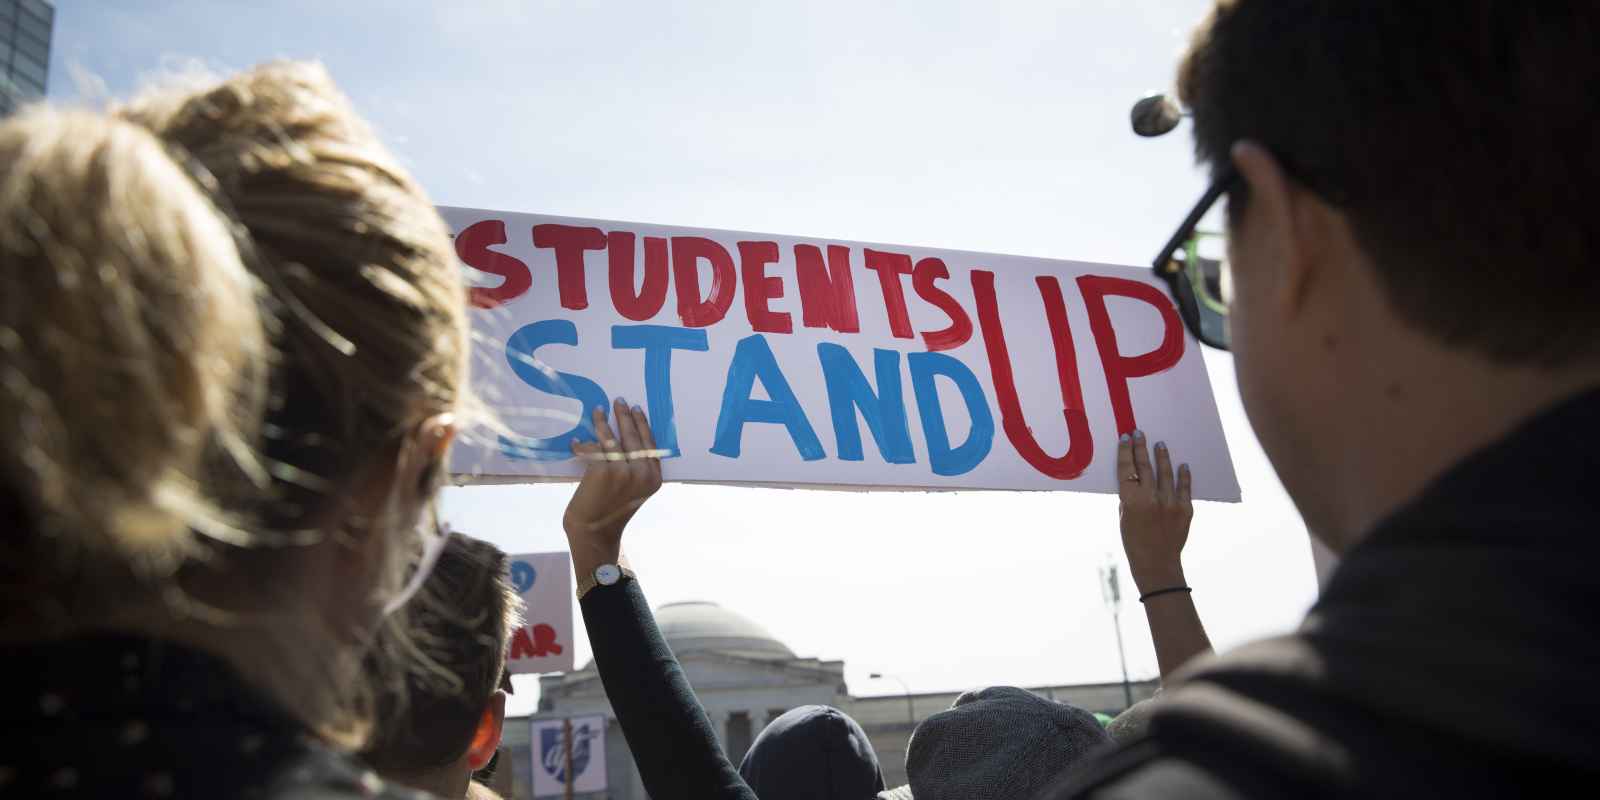 a person is holding up a white banner that reads "students stand up" in read and blue letters. In the foreground there are two people with their backs to us to either side of the sign. 